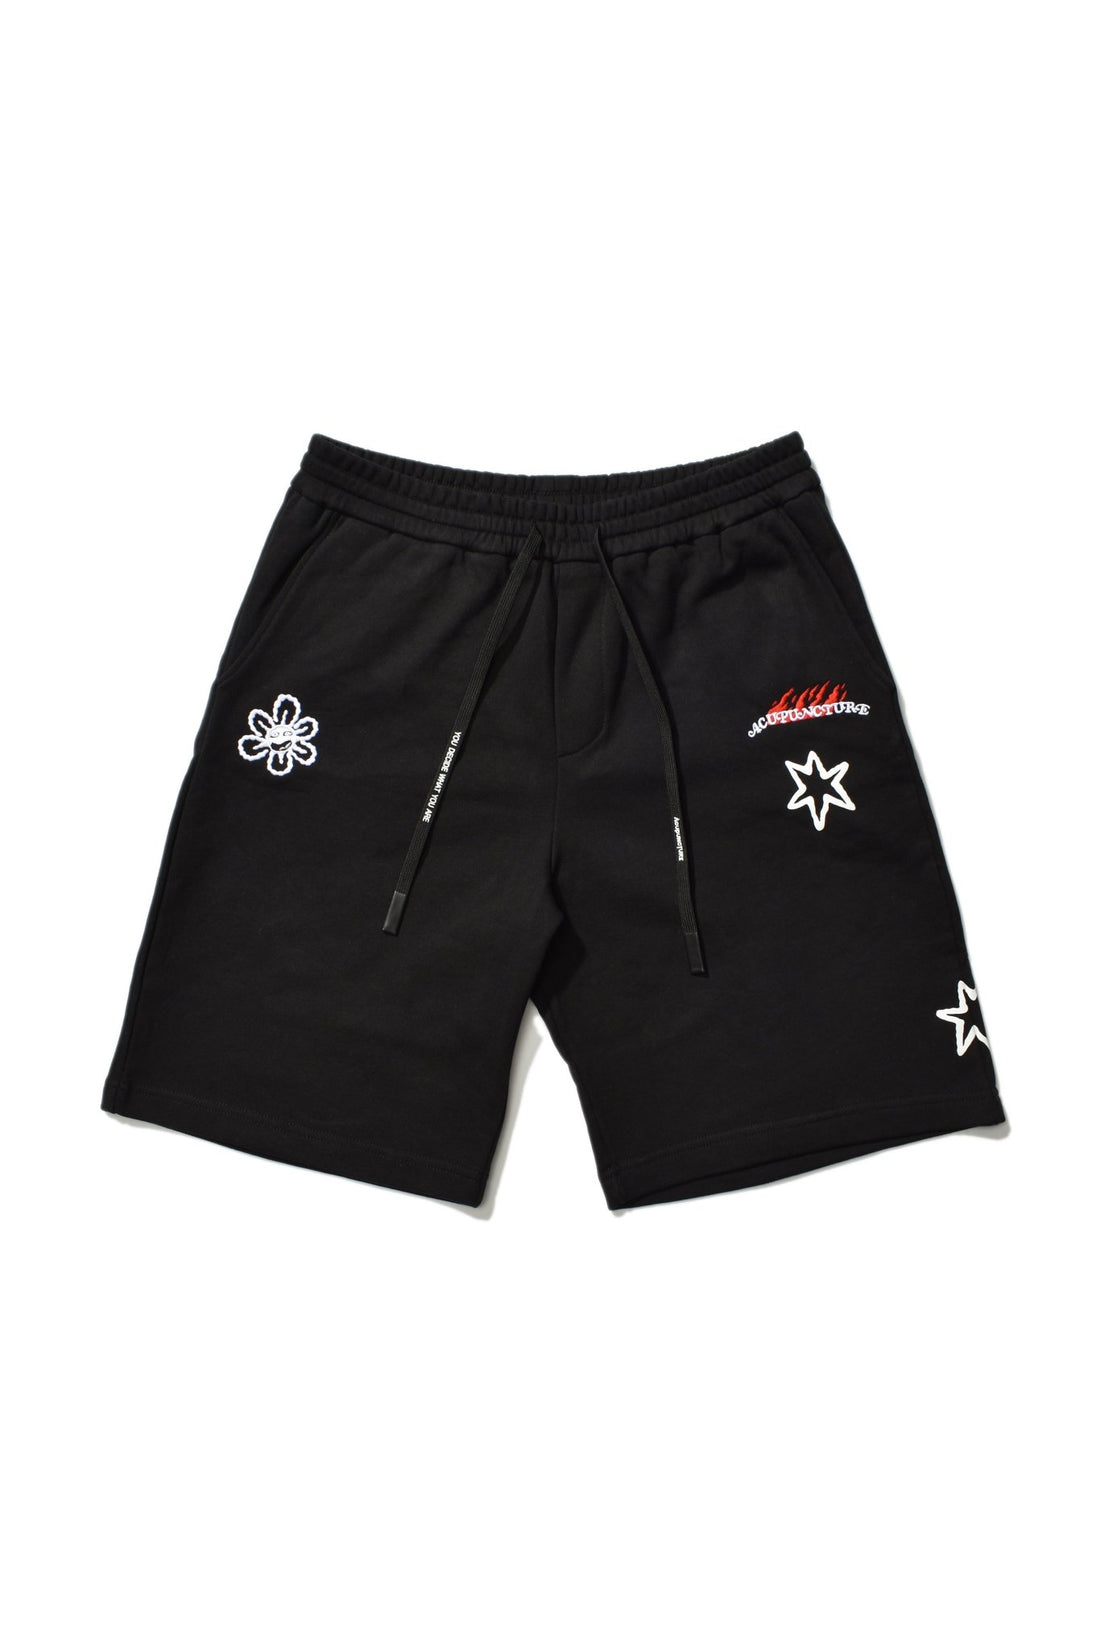 STAR MOON SHORTS Acupuncture